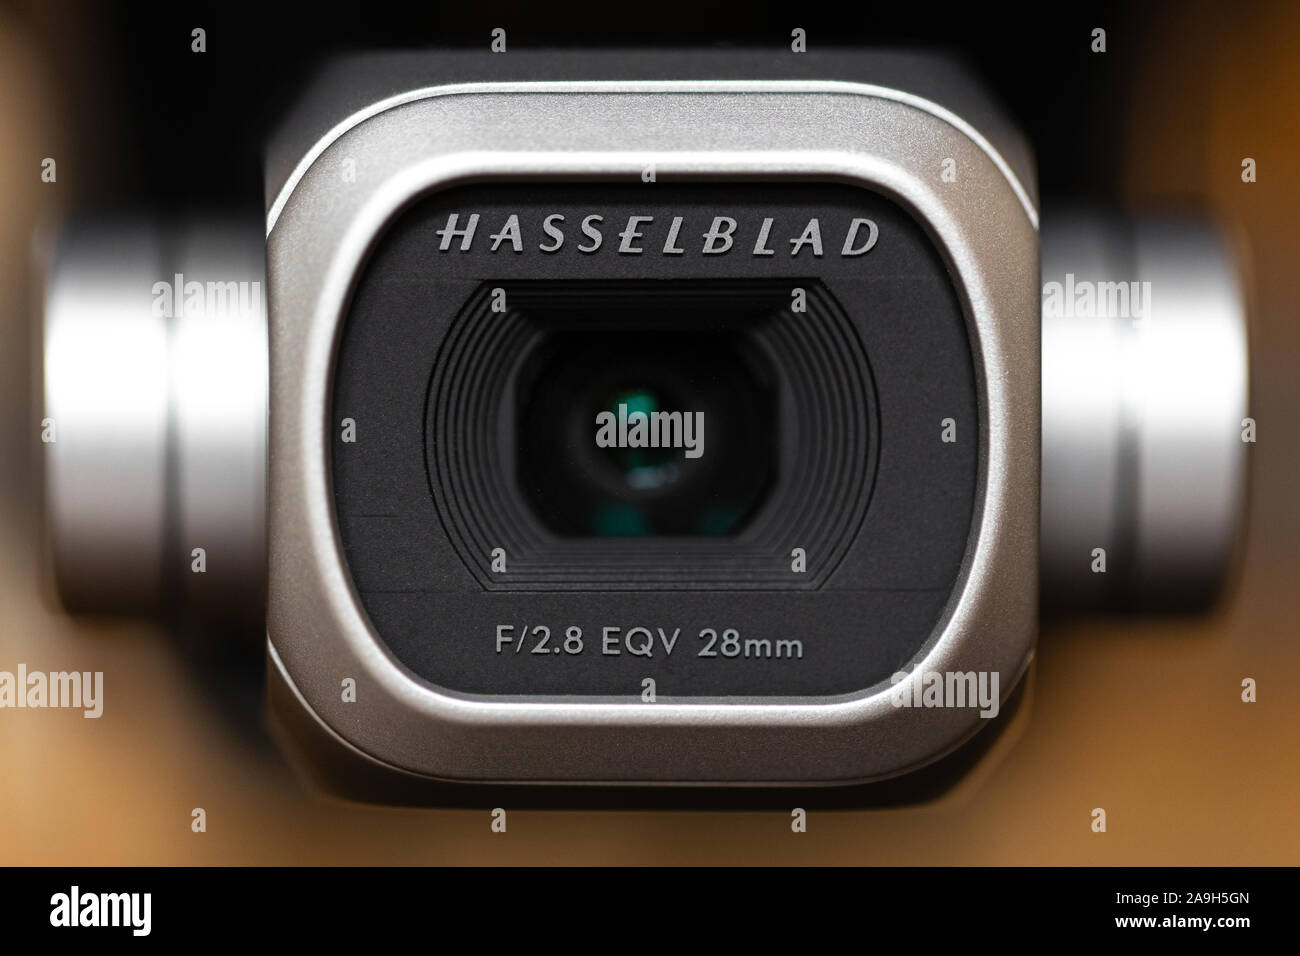 A close up of a Hasselblad camera on a DJI Mavic 2 Pro drone with a shallow depth of field. This large sensor produces beautiful aerial photos. Stock Photo